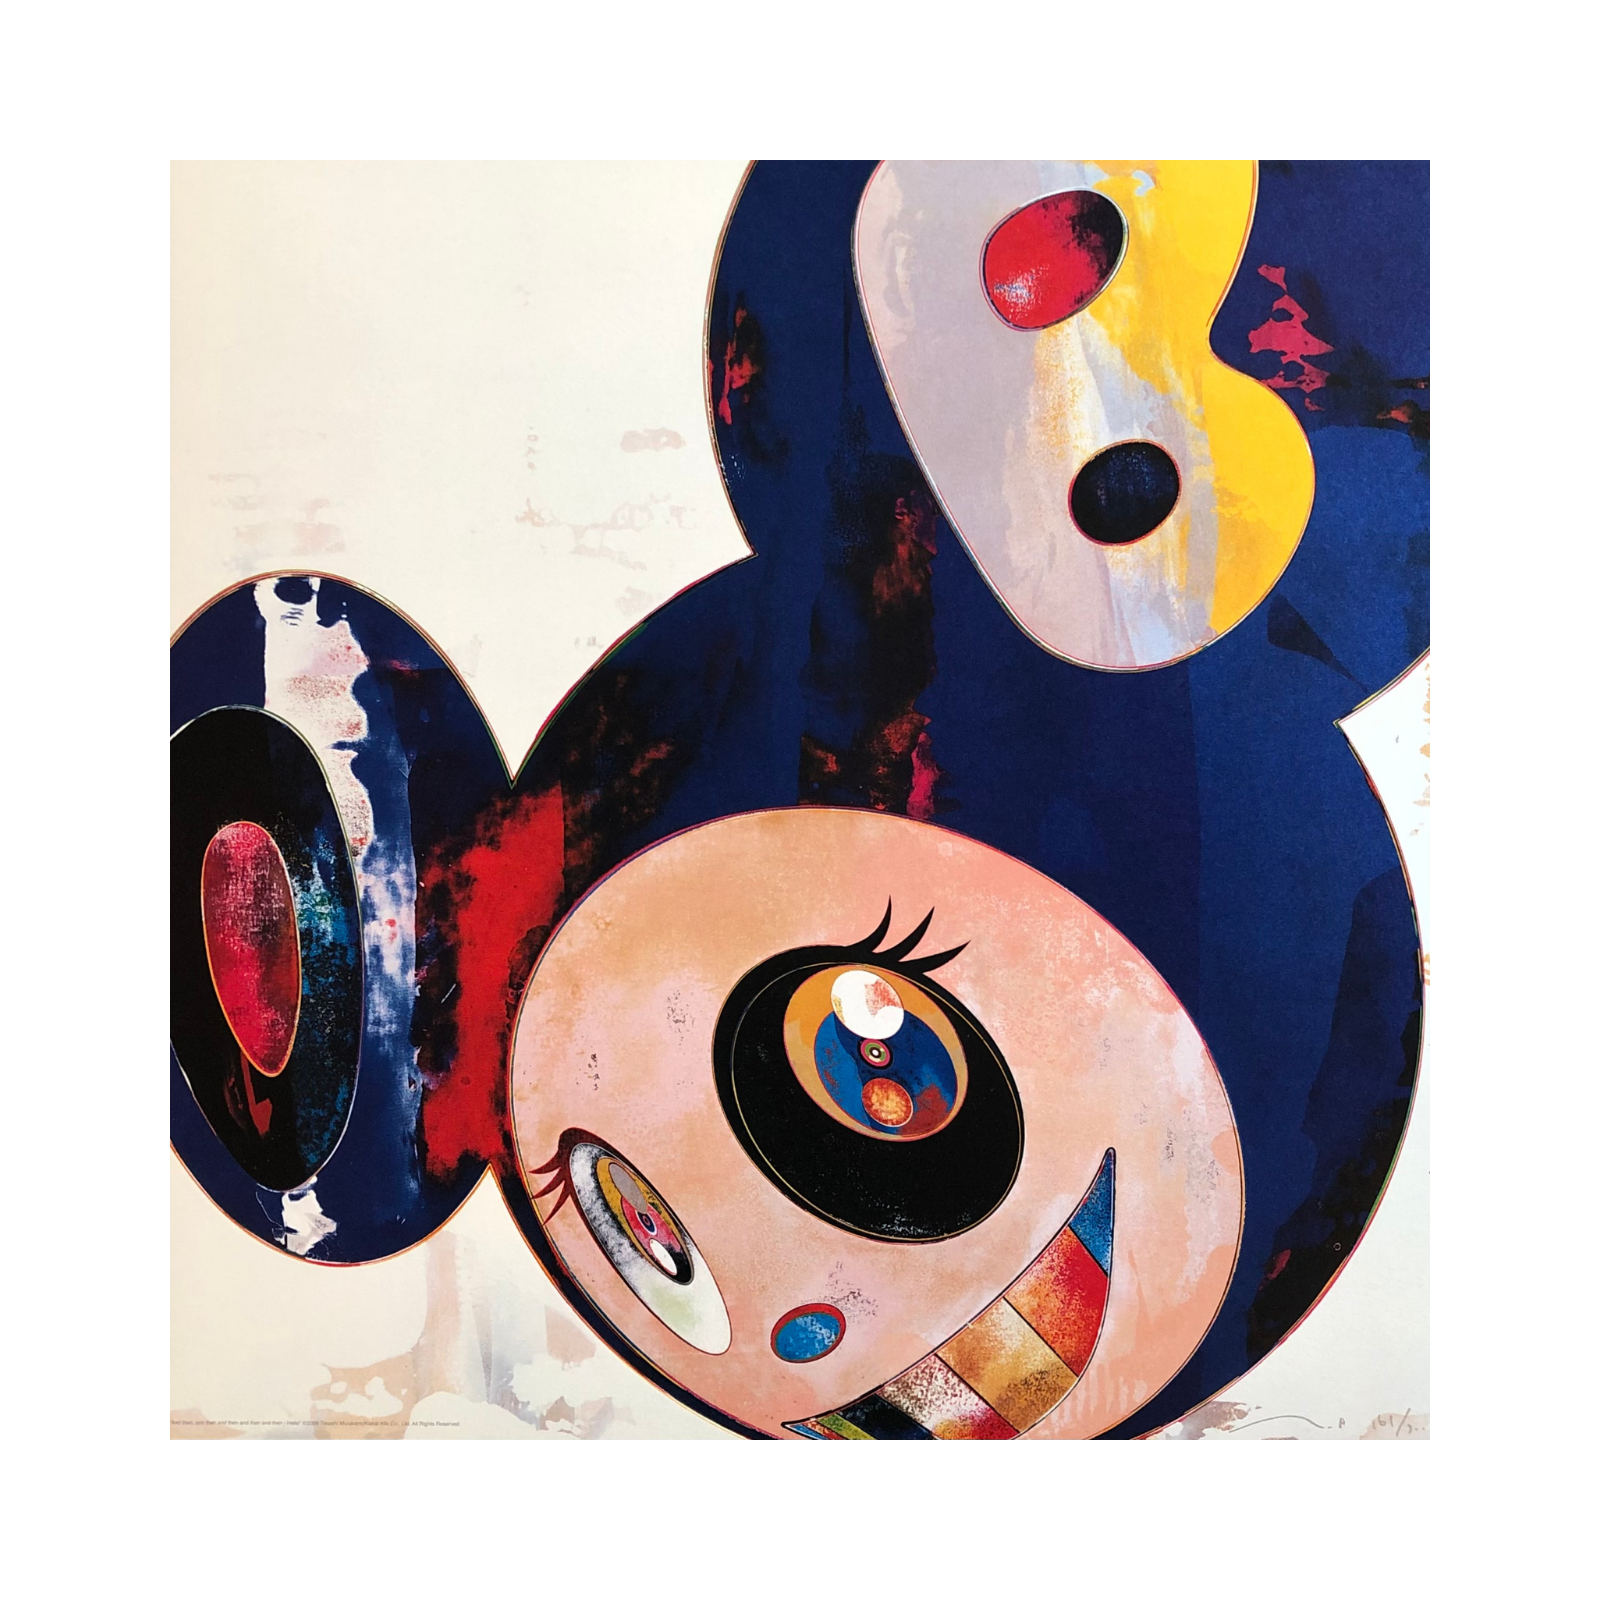 Takashi Murakami - And then, and then and then and then and then / Hello FREE SHIPPING WORLDWIDE